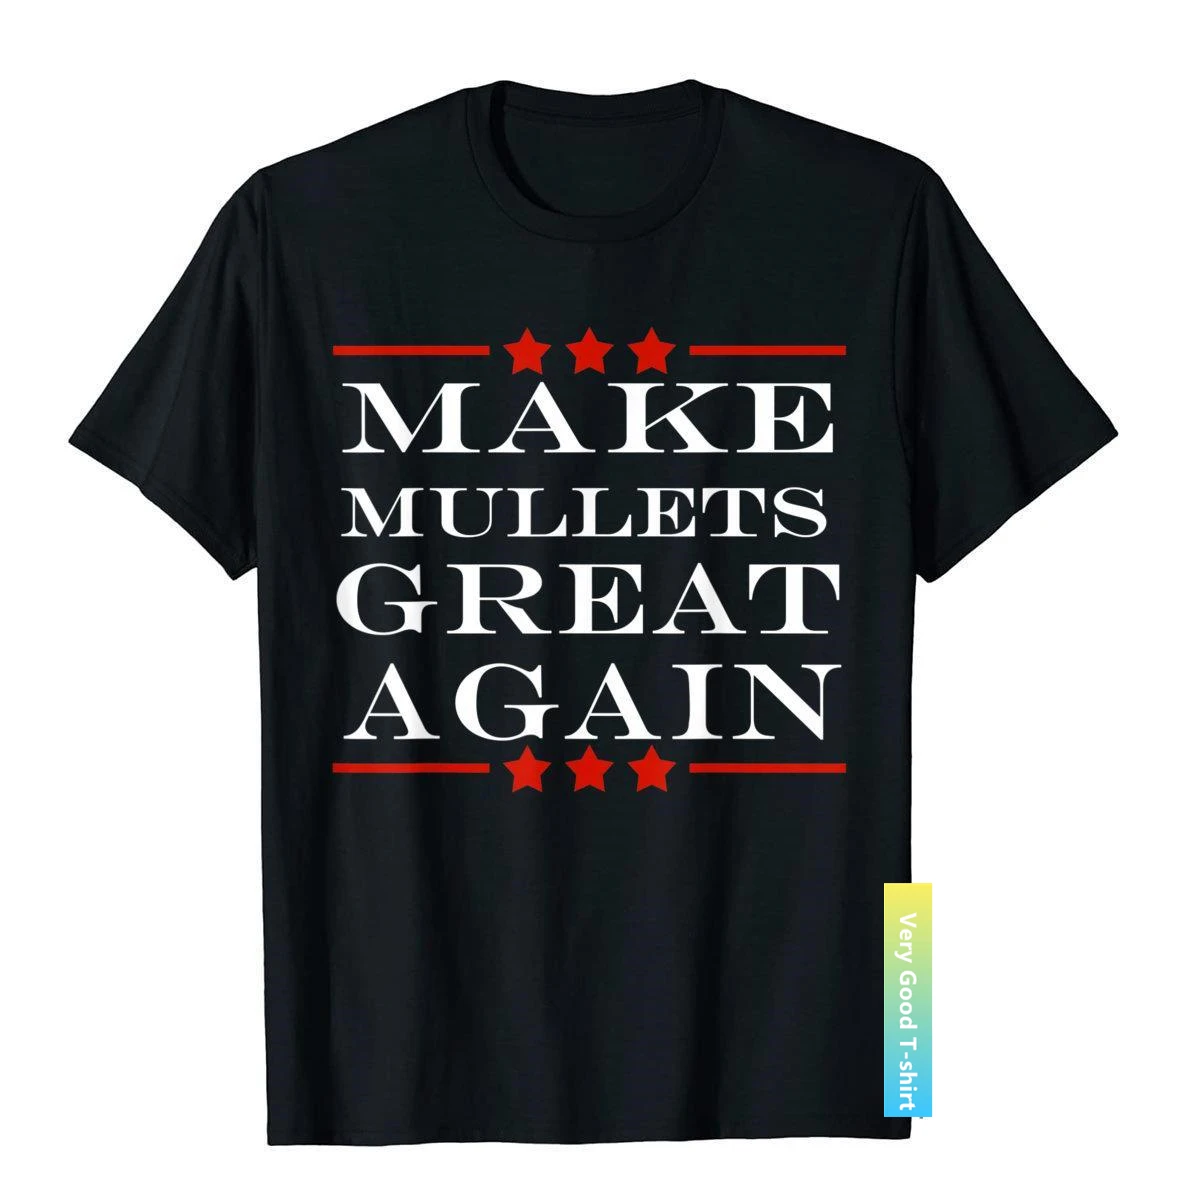 

Make Mullets Great Again Funny Political Humor T-Shirt T Shirt Printing Company Cotton Tees Leisure For Men